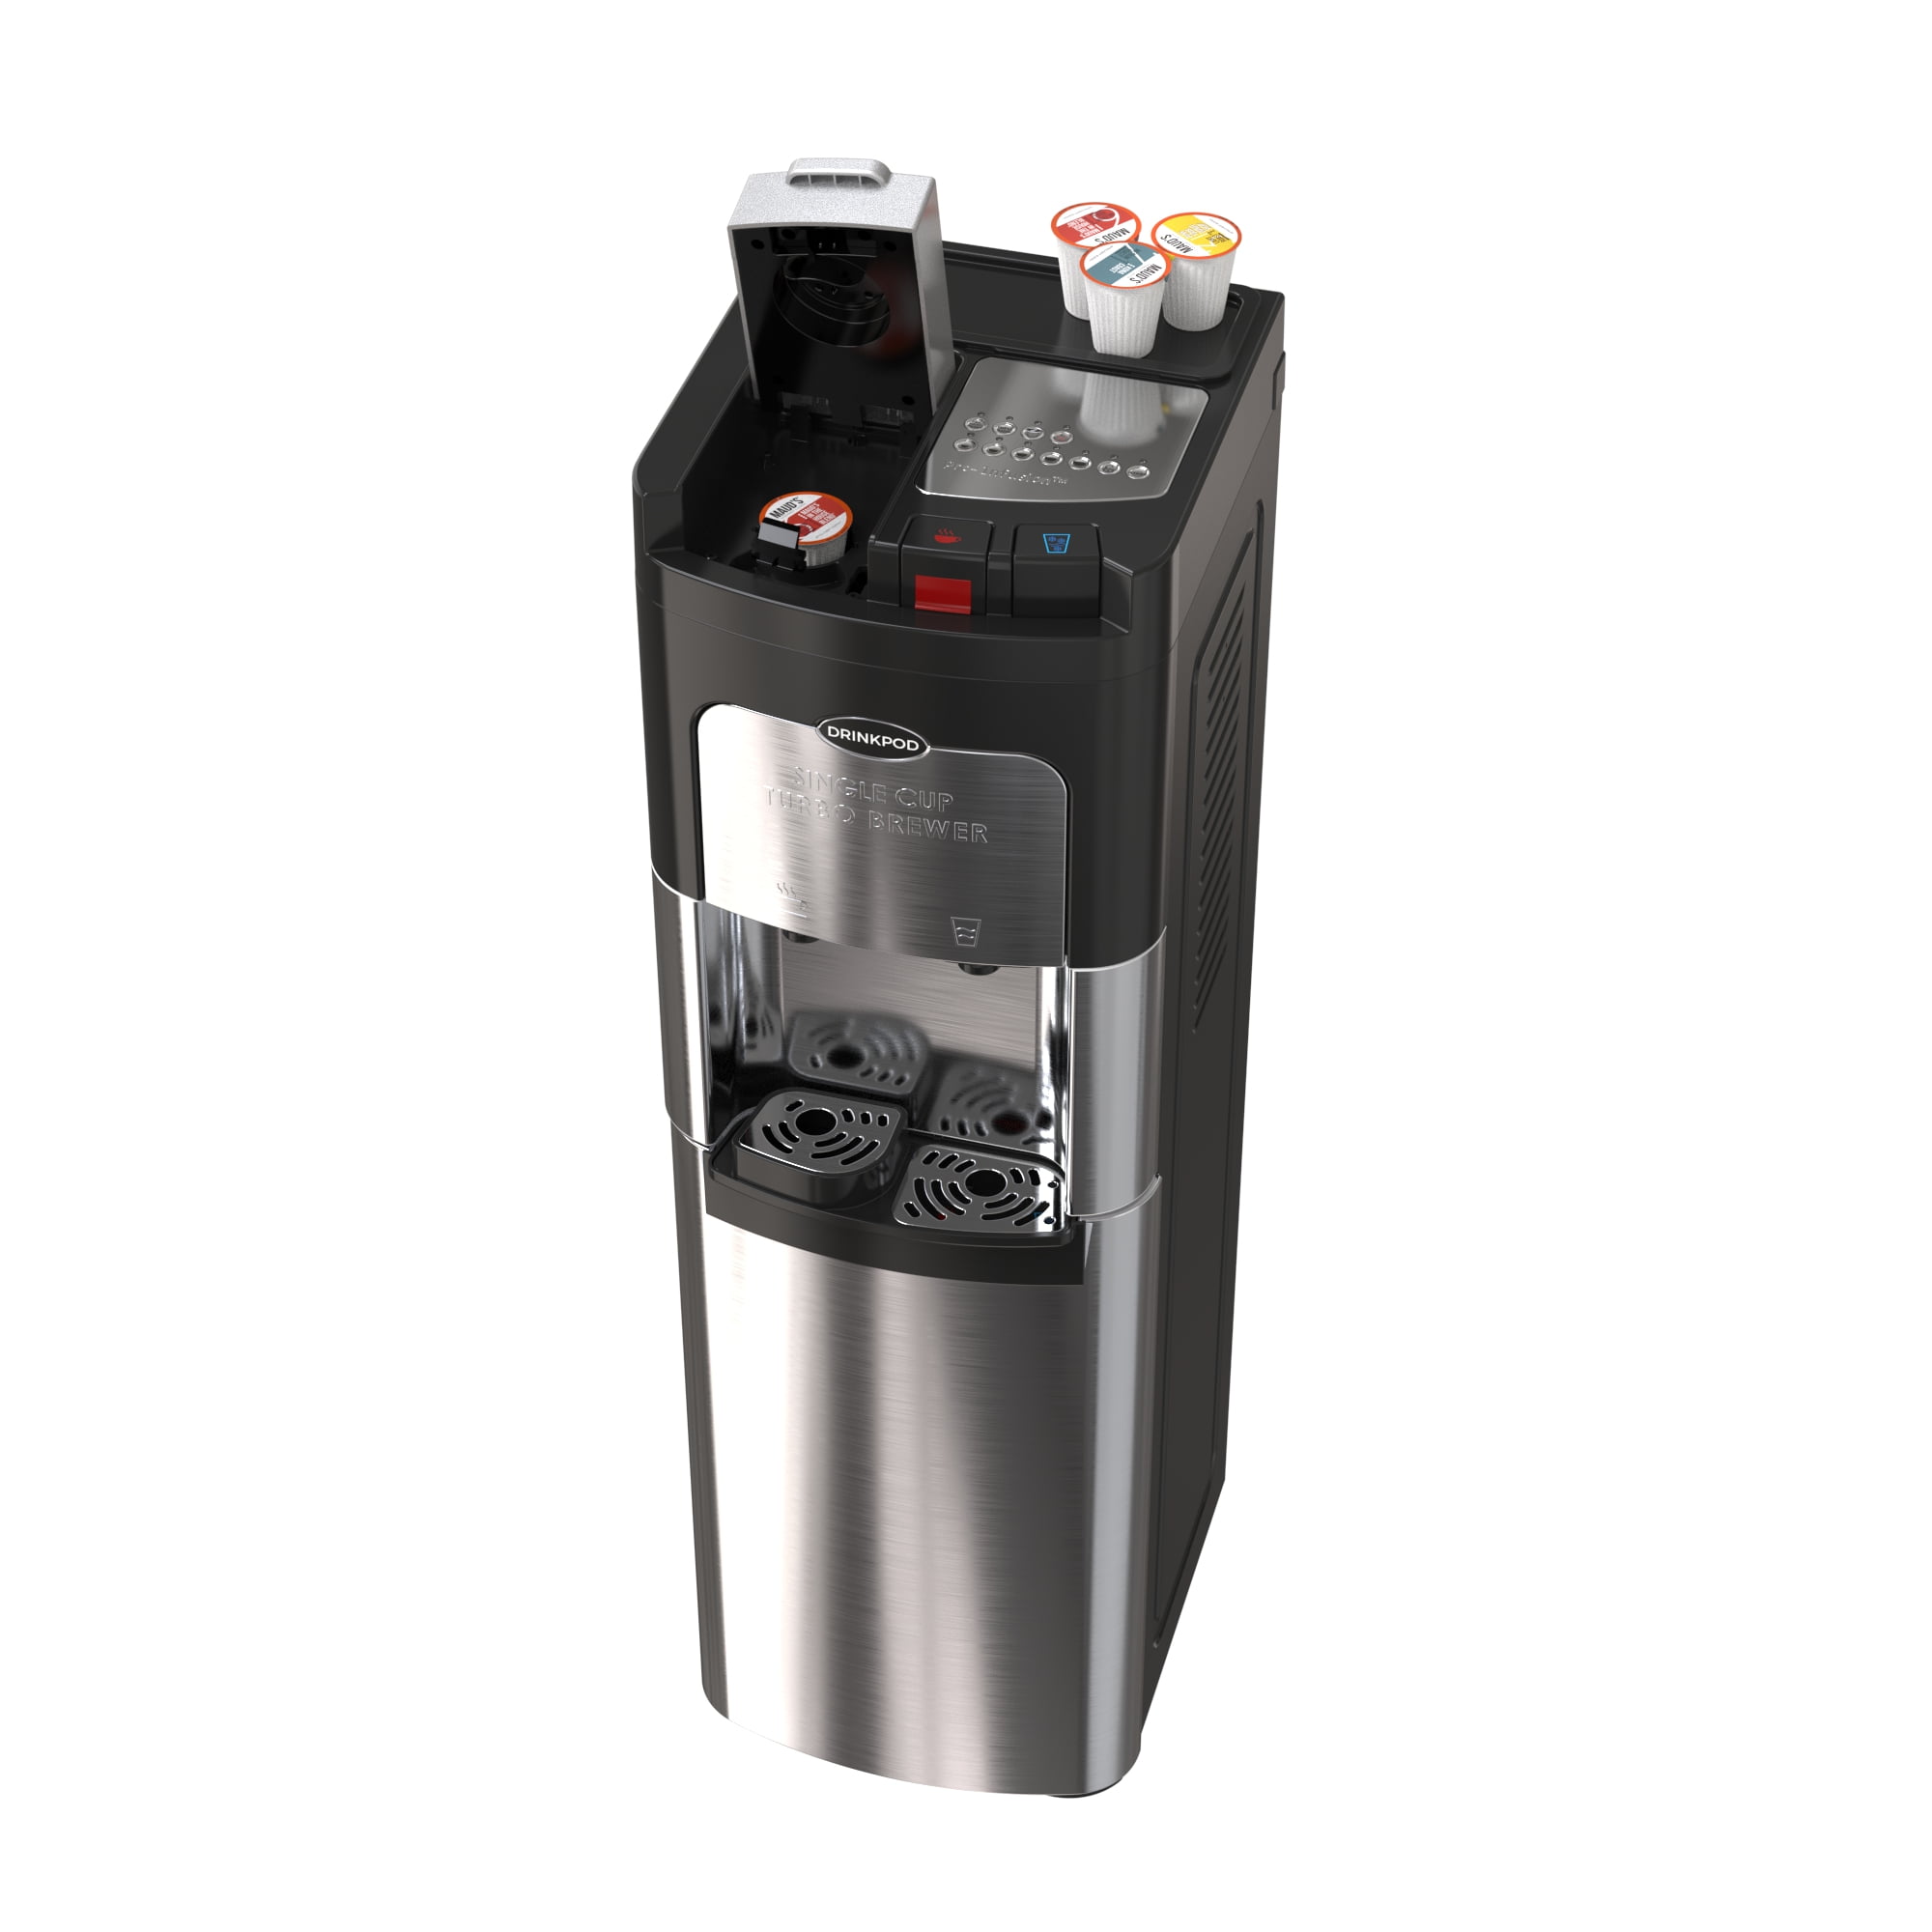 Drinkpod 3000 Elite Series Bottleless Water Cooler With Filters and  Integrated K Cup Coffee Maker